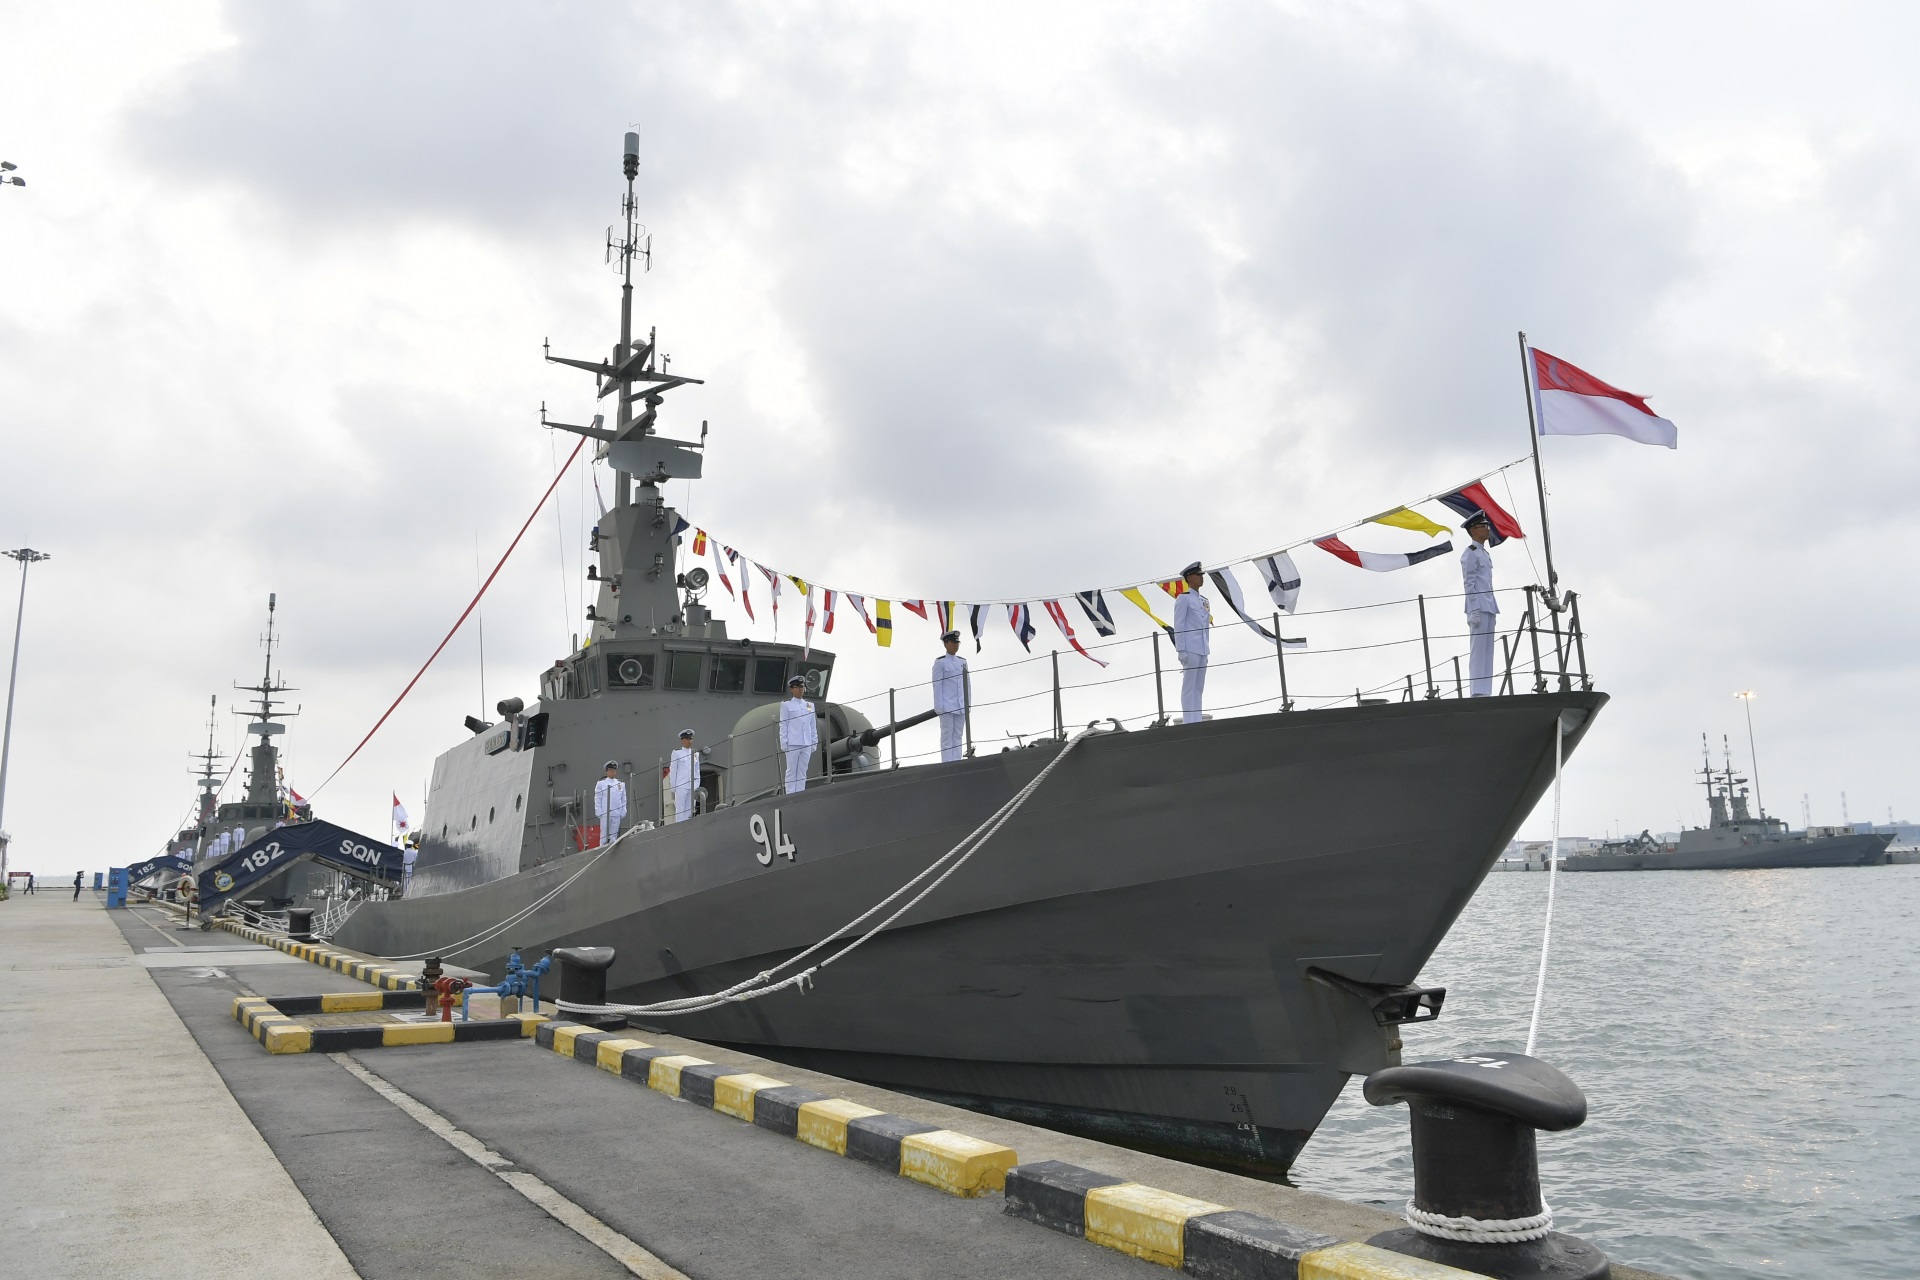 Republic of Singapore Navy Patrol Vessels RSS Fearless (foreground), RSS Brave (middle) and RSS Dauntless (background -left) at the decommissioning ceremony in Tuas Naval Base.